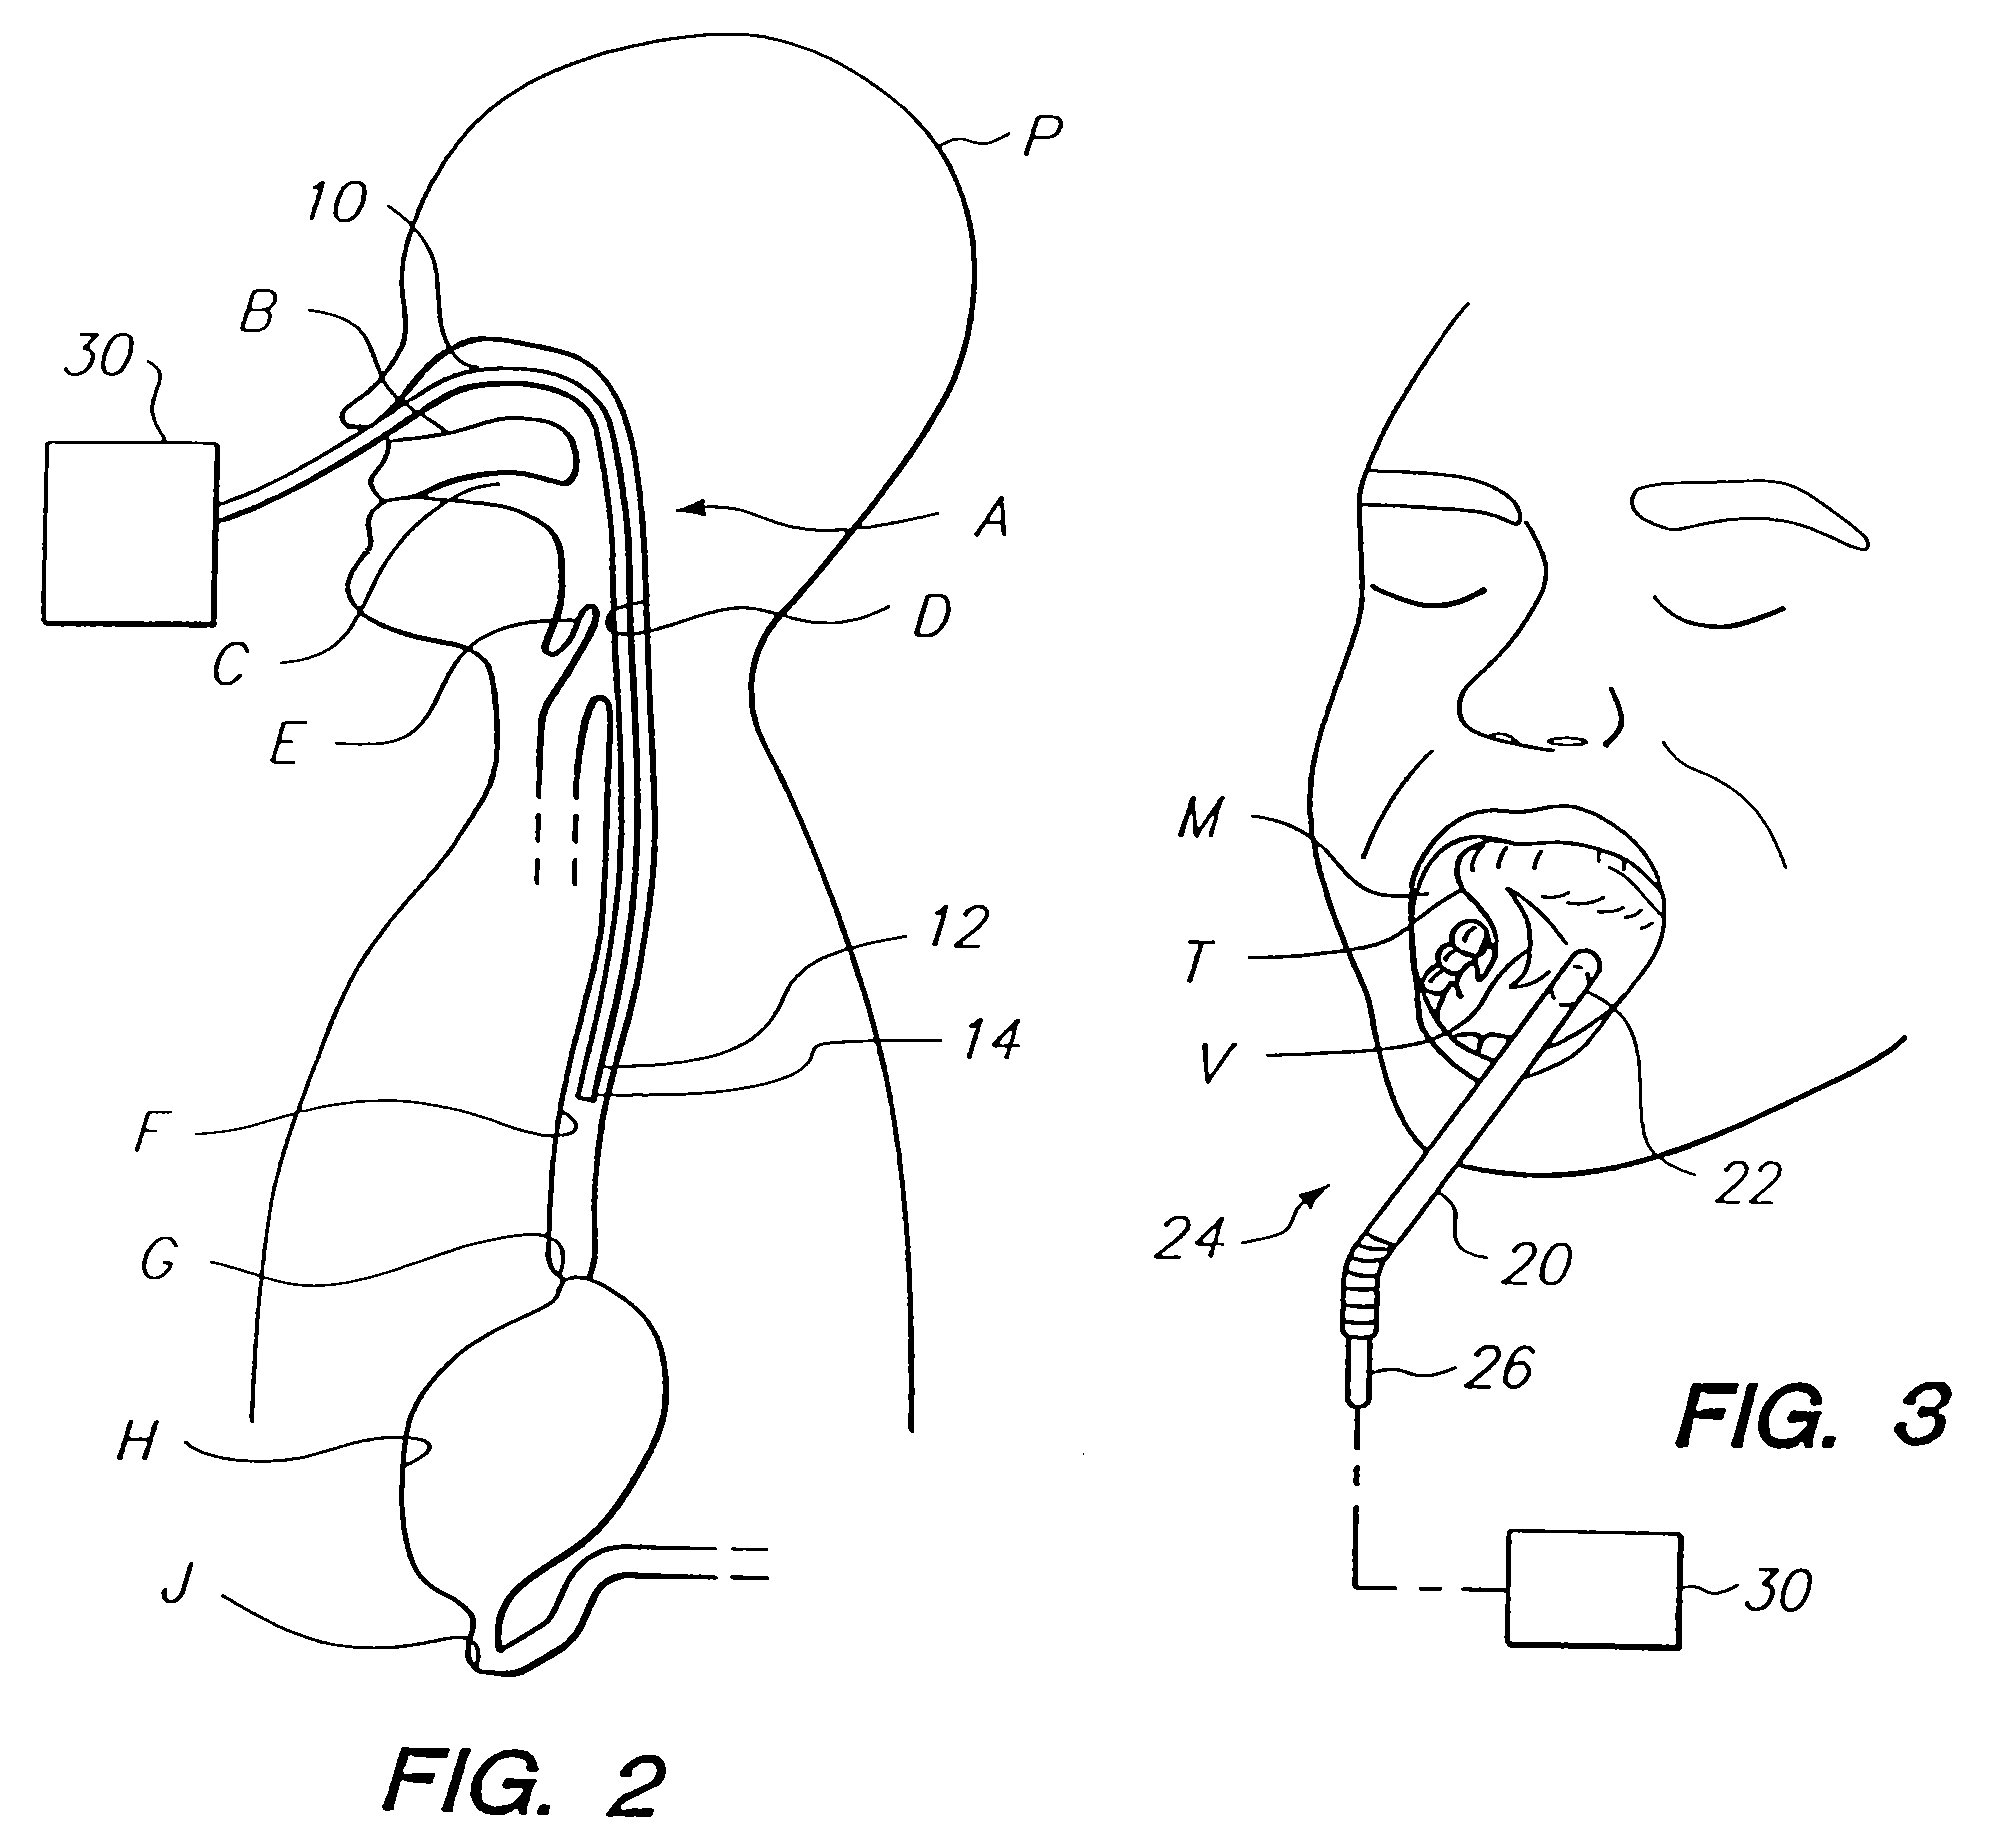 Device for assessing perfusion failure in a patient by measurement of blood flow